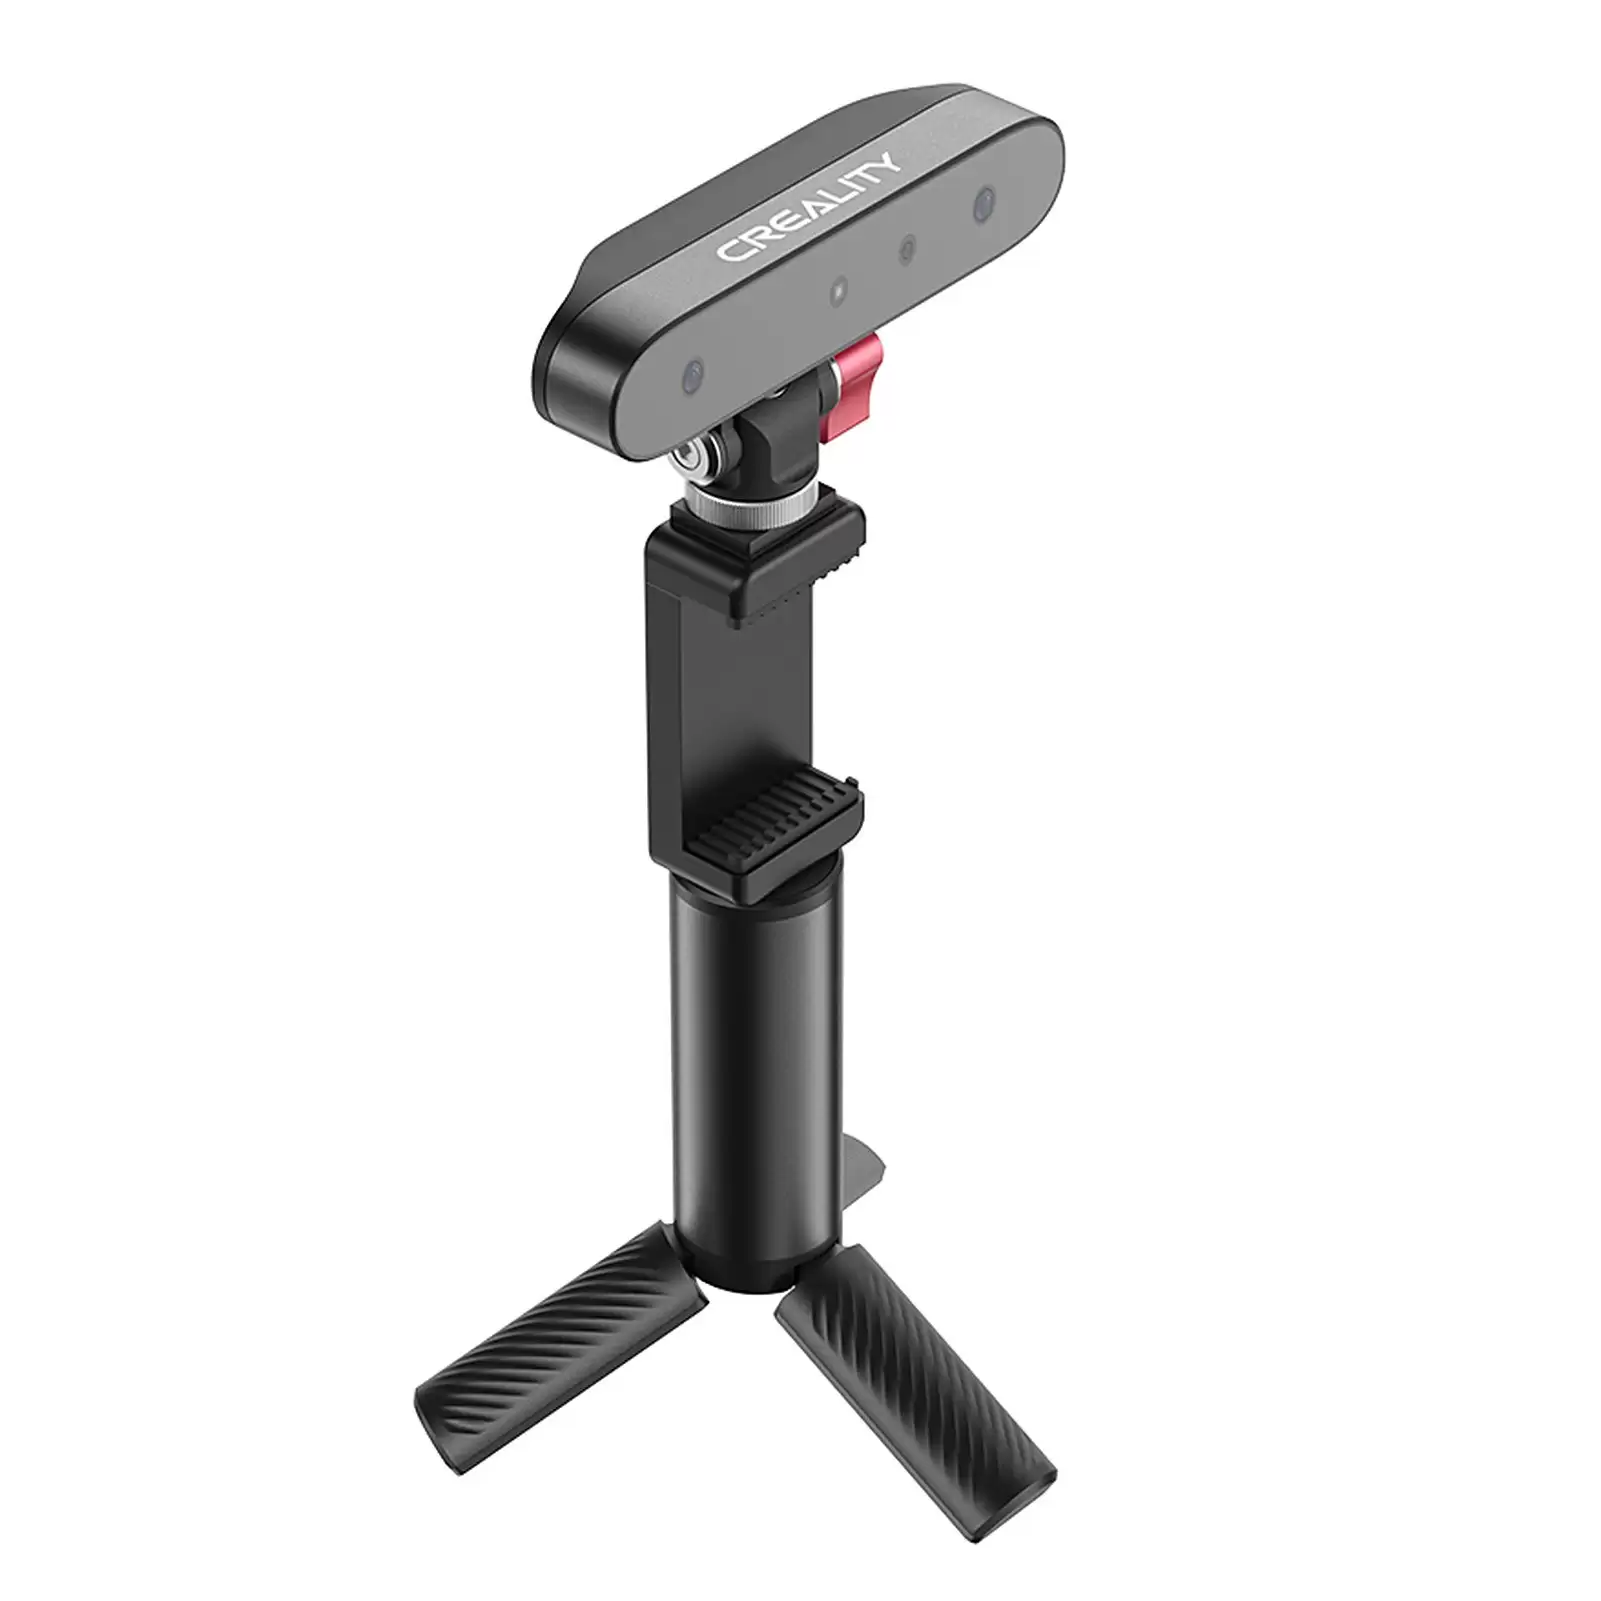 Order In Just $246.45 [Eu Warehouse] Creality Cr-Scan Ferret 3d Scanner